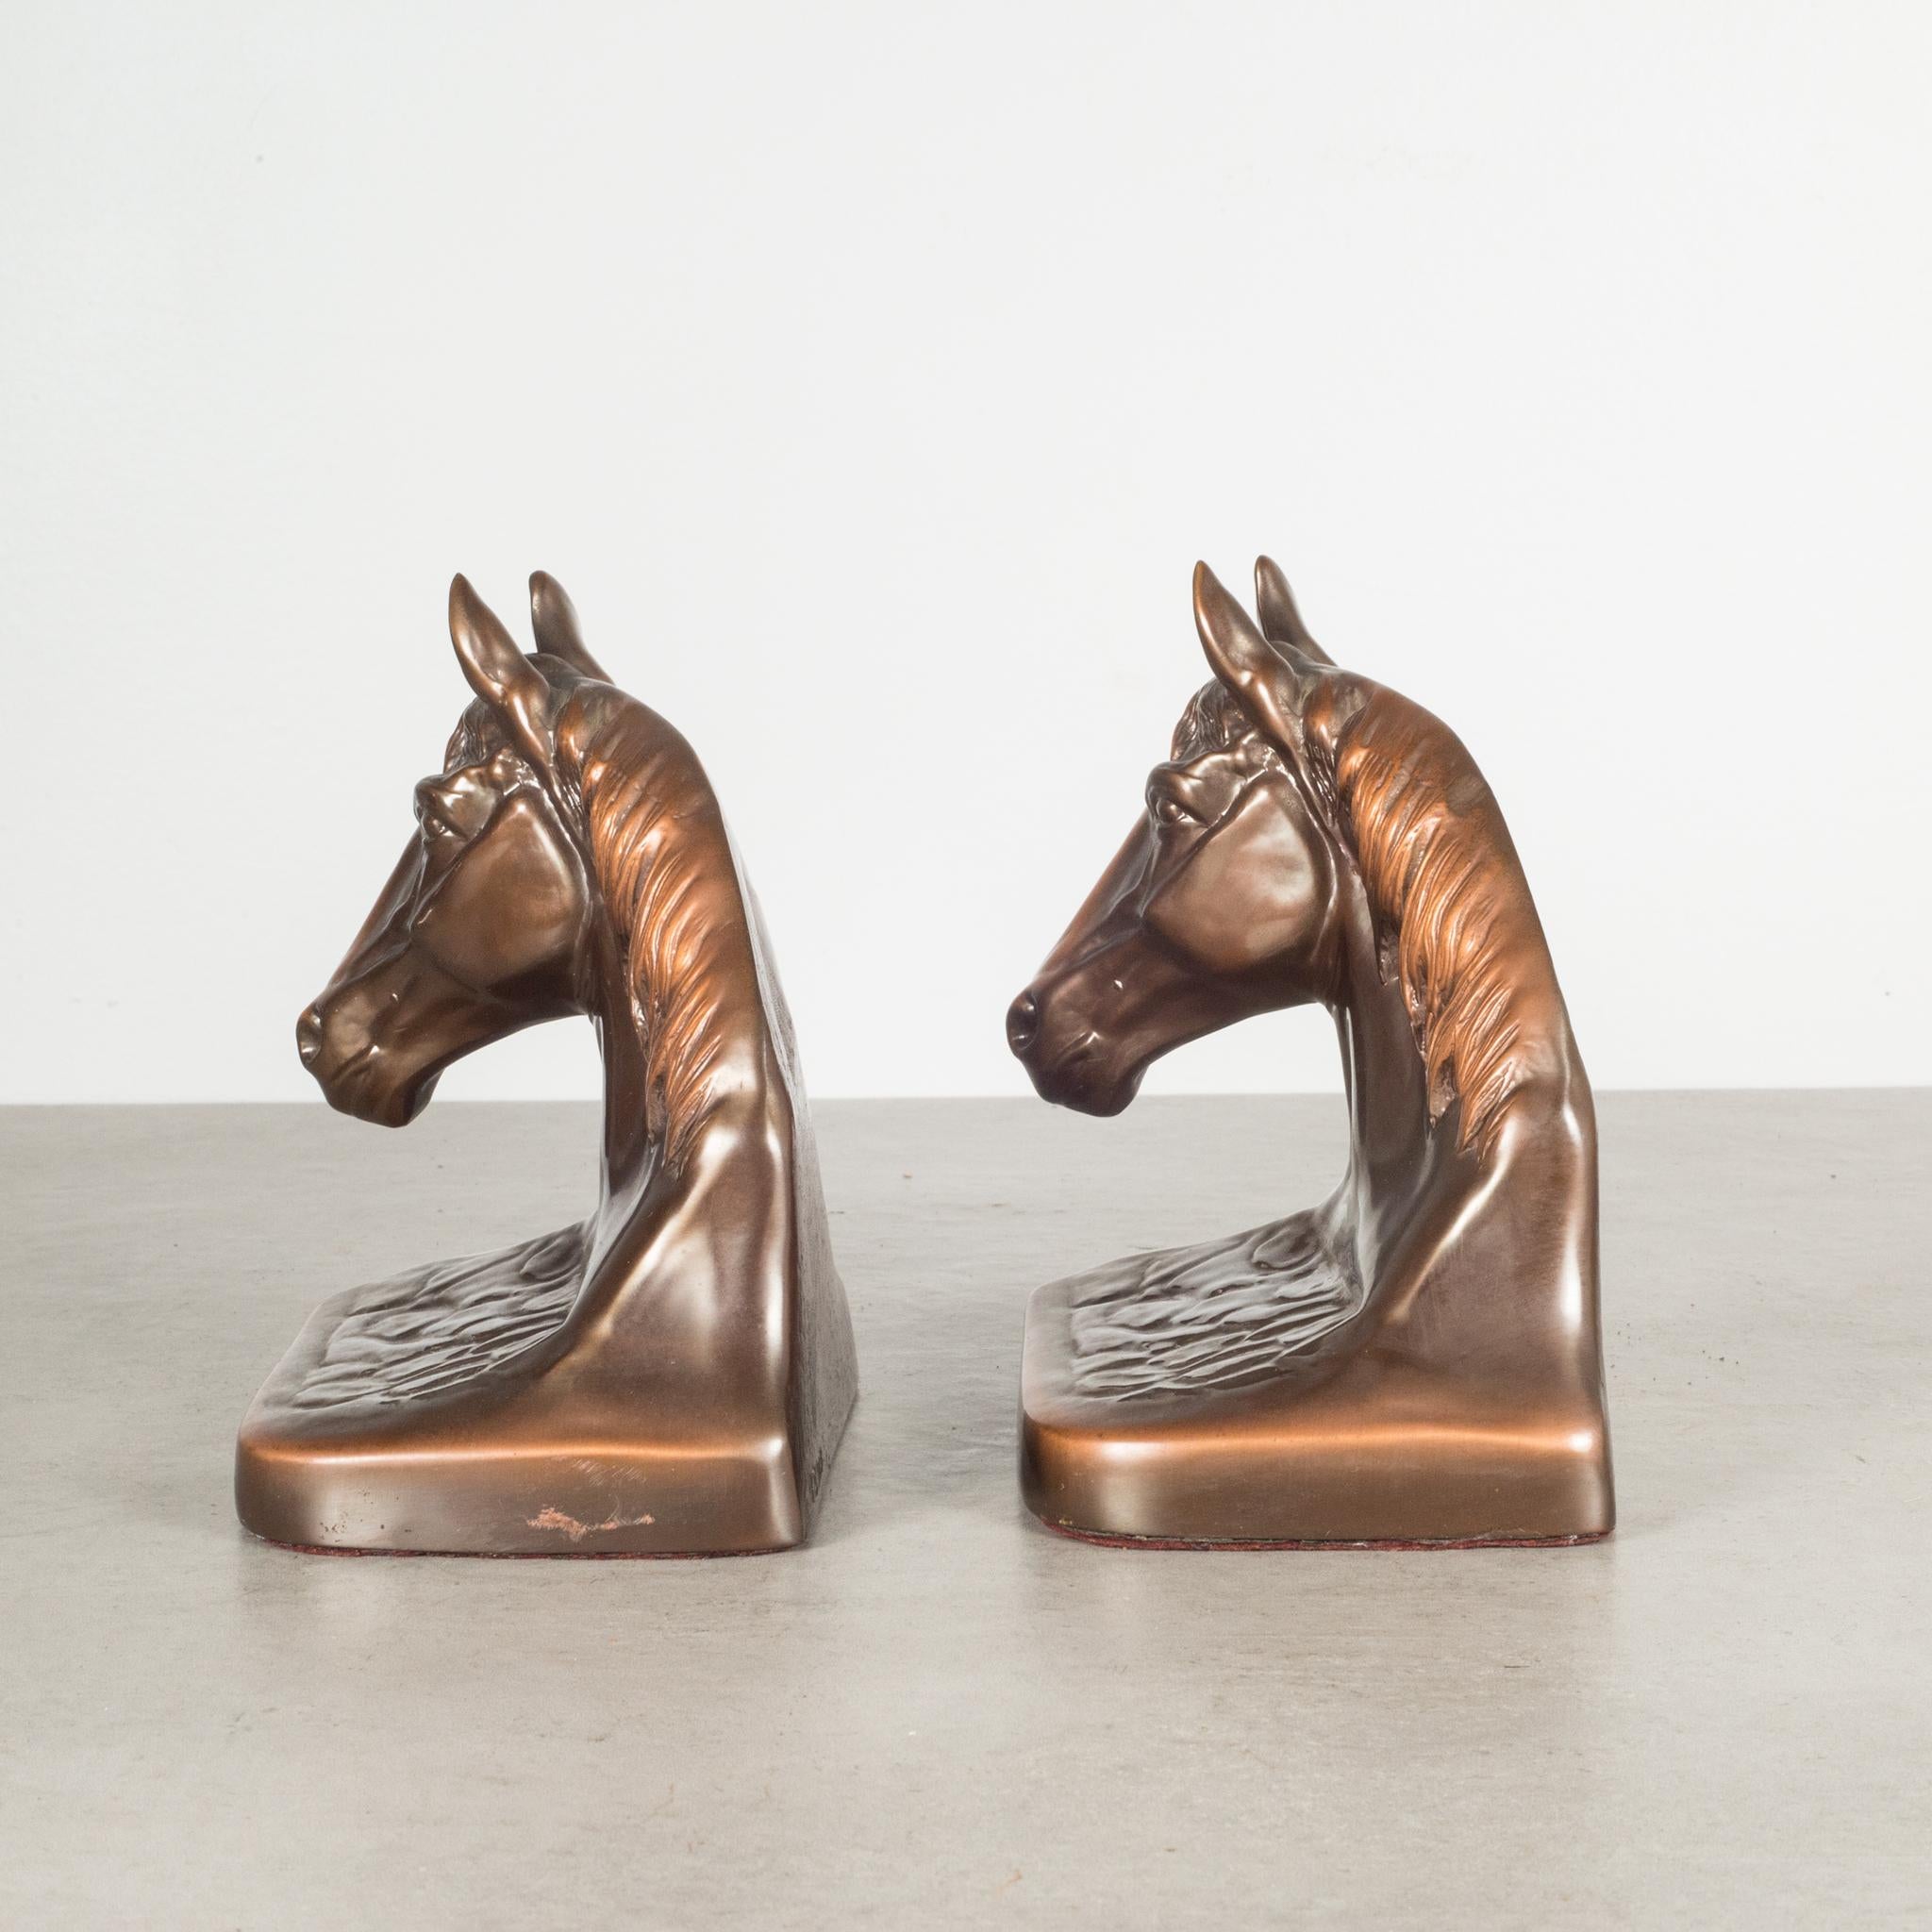 Industrial Bronze-Plated Horse Head Bookends, circa 1940s